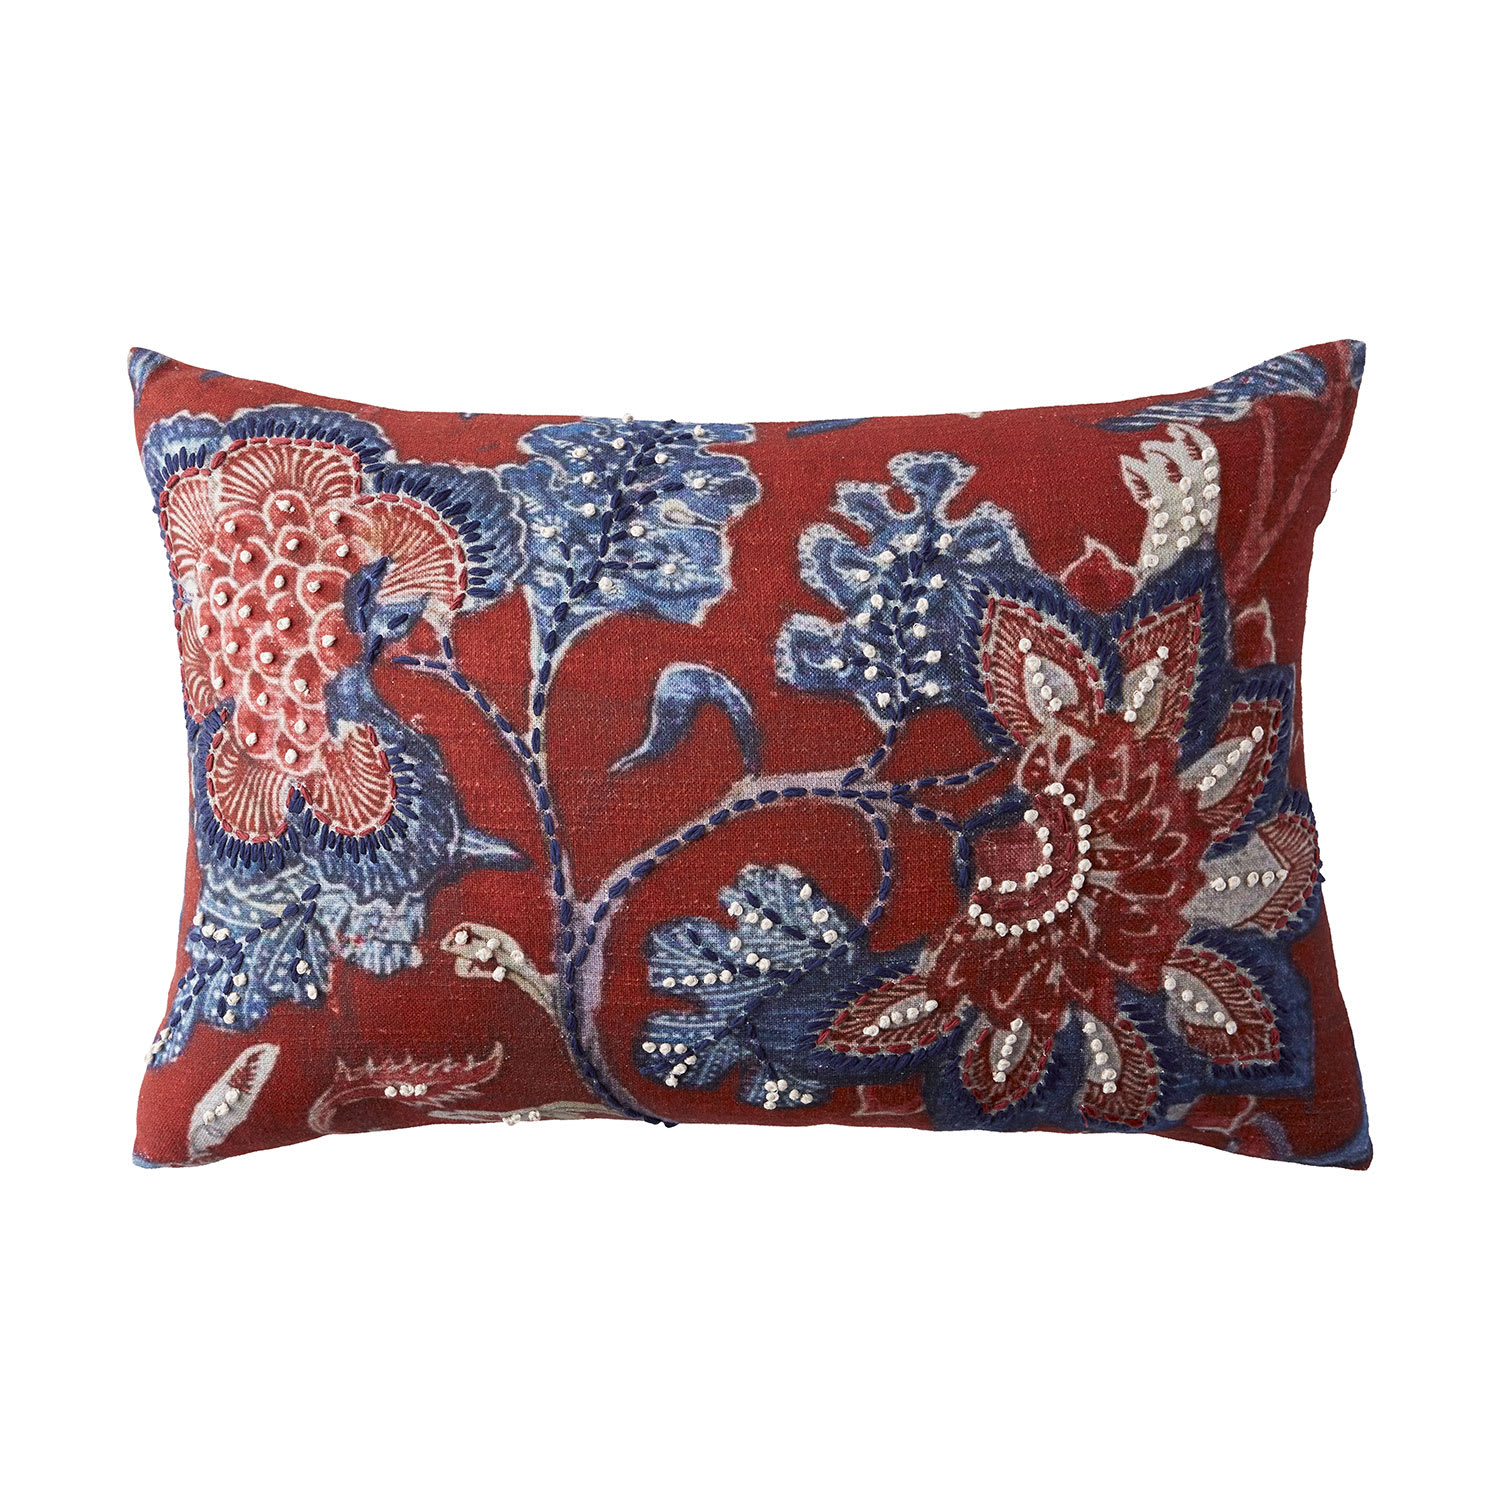 Multicolored Flower Embroidered Pillow Cover - Embroidered Flower